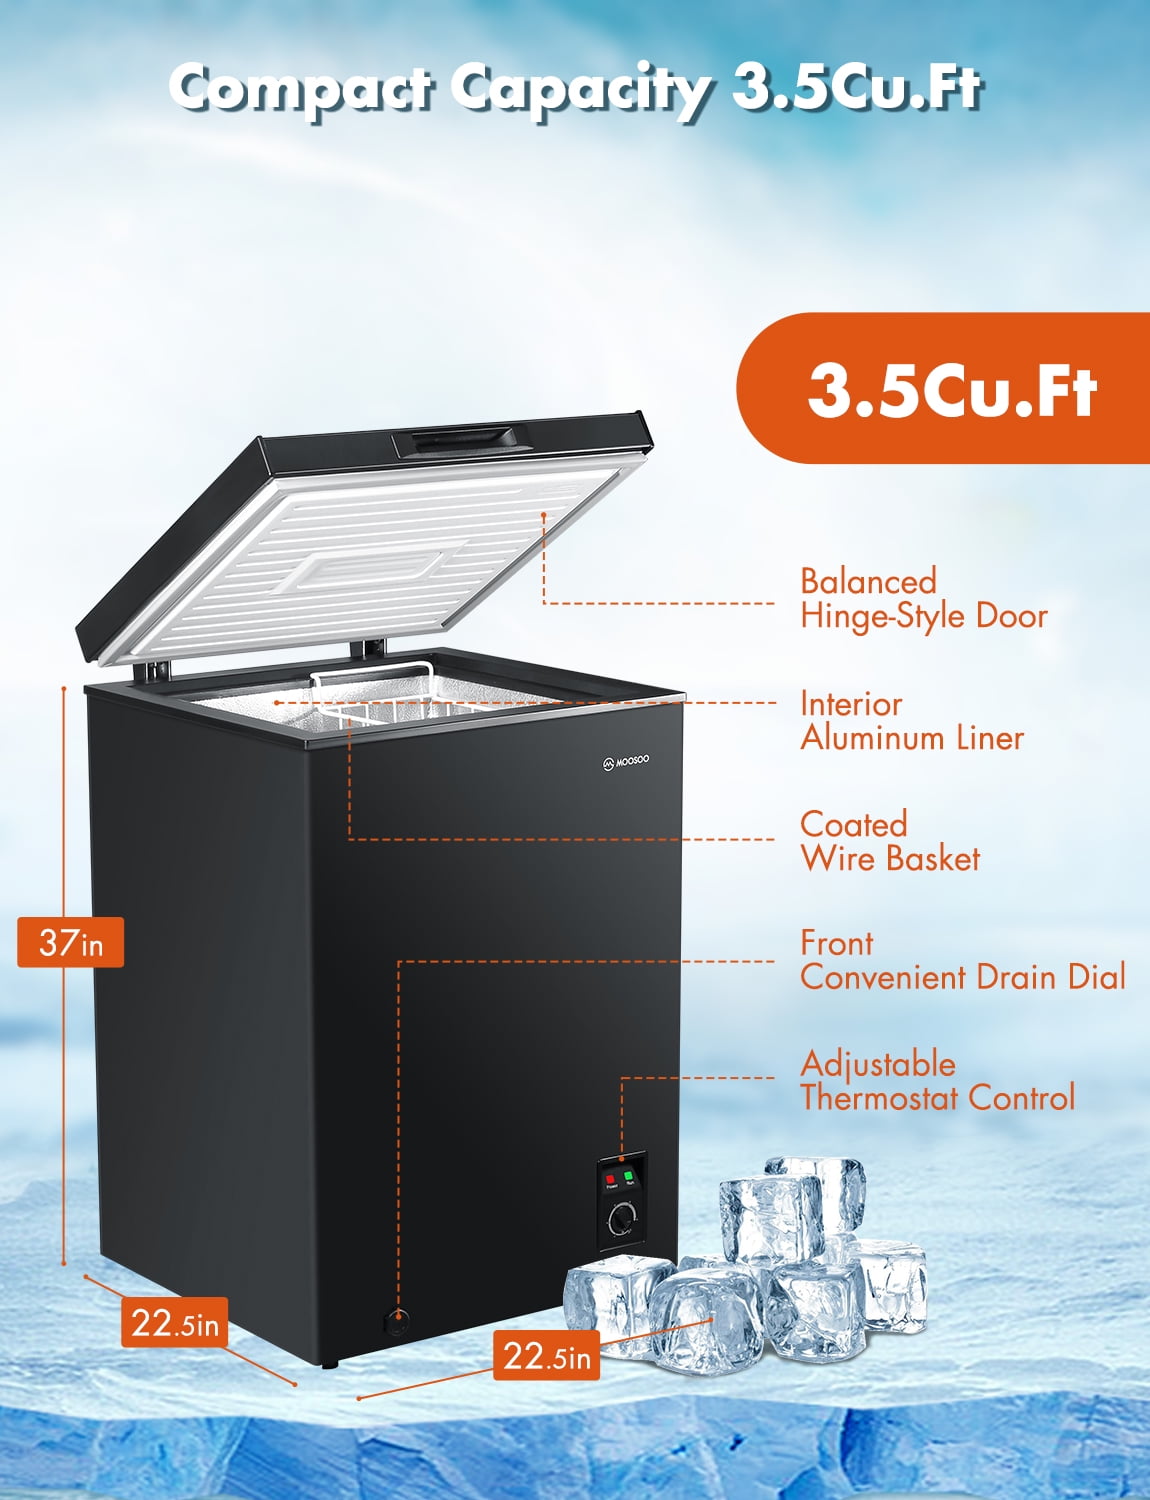 Black)Chest Freezer 3.5 Cubic Feet, Deep, Adjustable Temperature,from CA  92408